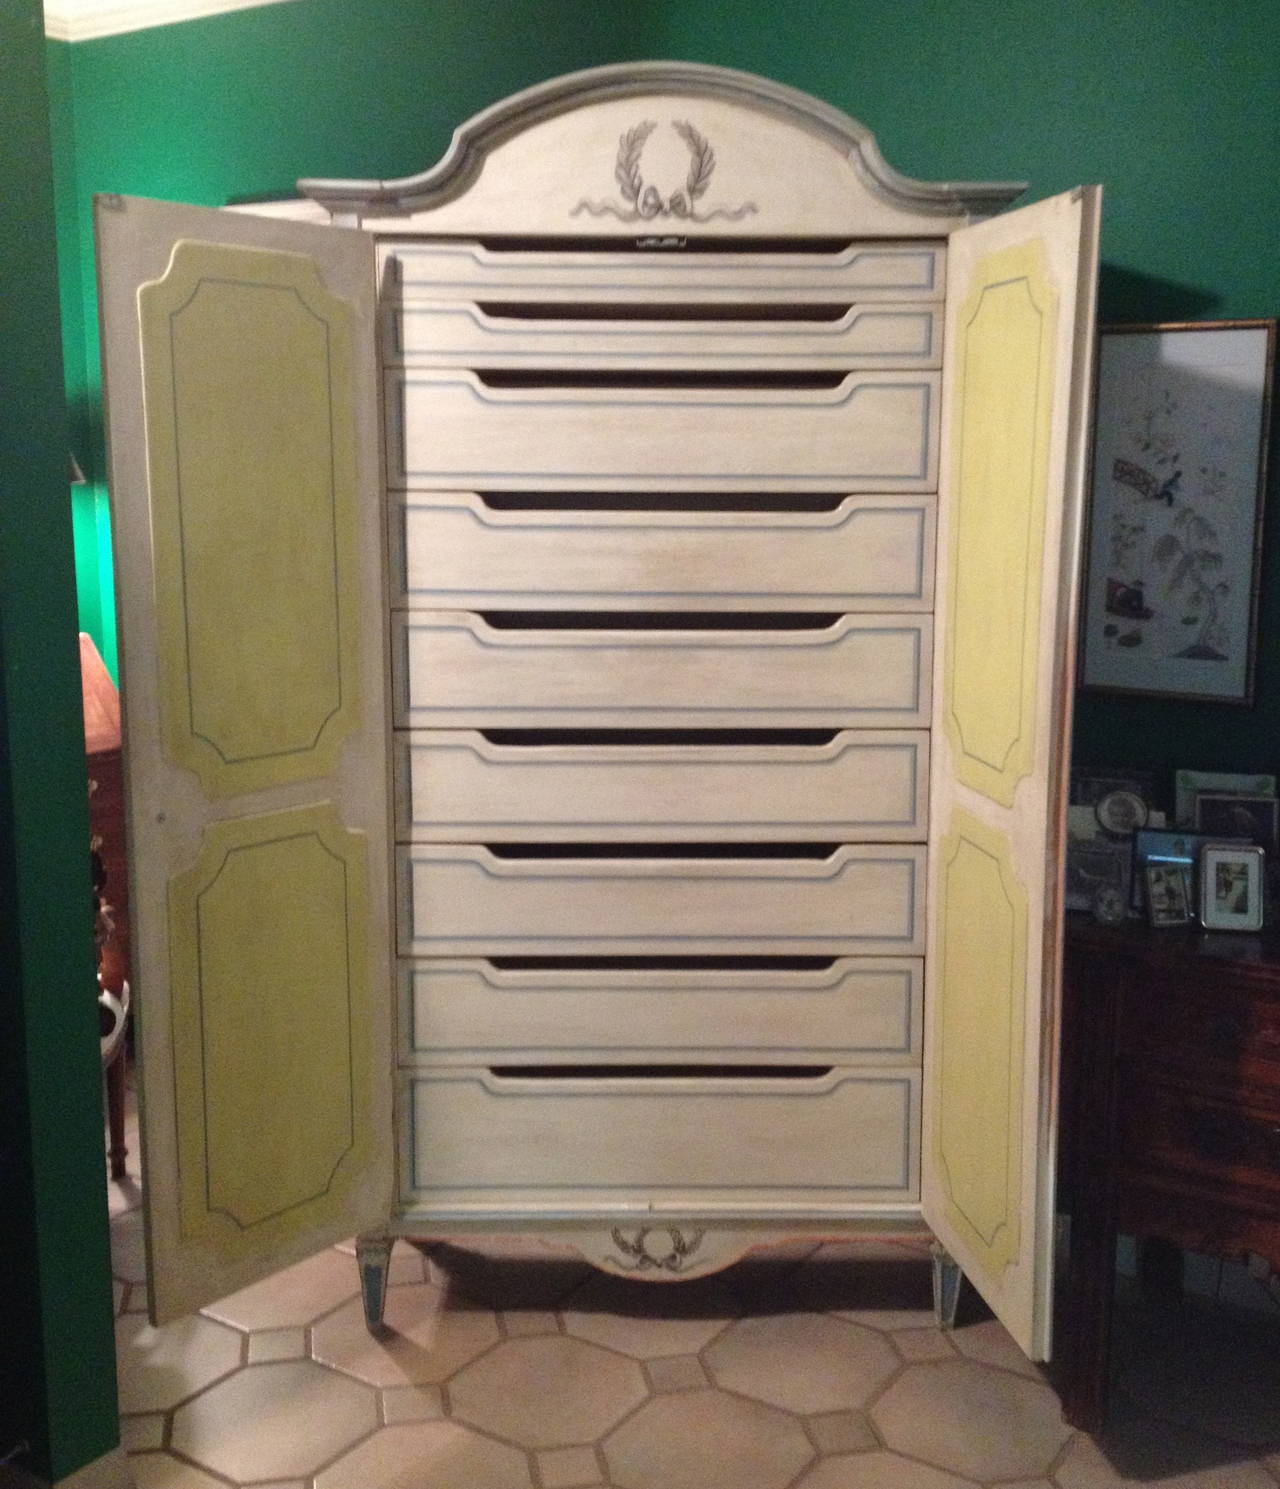 Niccolini custom hand-painted armoire with two recessed paneled doors, nine interior drawers, painted cream with accents of turquoise, yellow and orange.